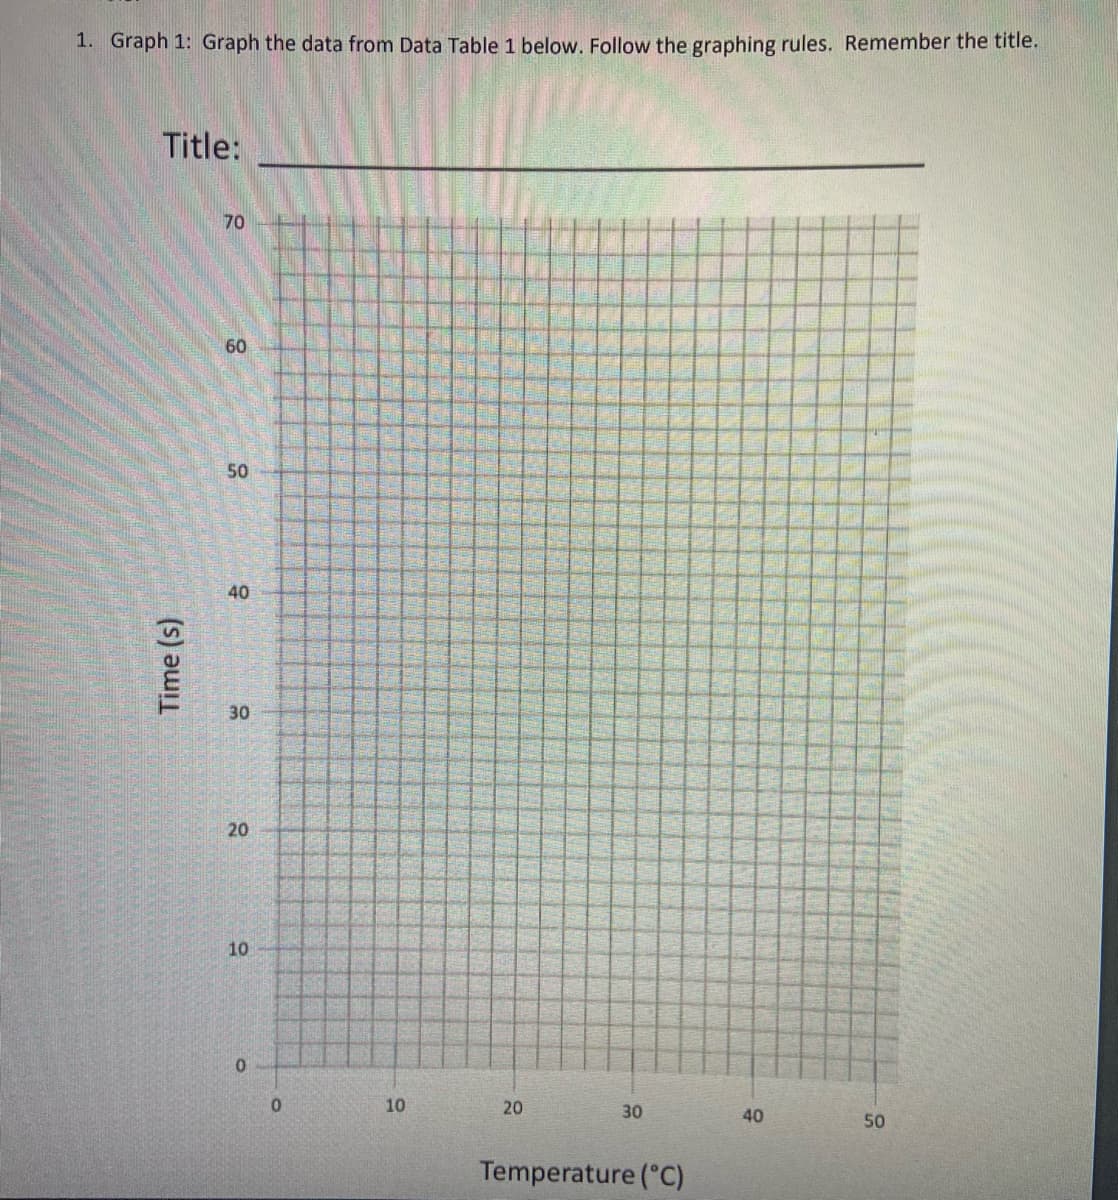 1. Graph 1: Graph the data from Data Table 1 below. Follow the graphing rules. Remember the title.
Title:
70
60
50
40
30
20
10
10
20
30
40
50
Temperature (°C)
Time (s)
